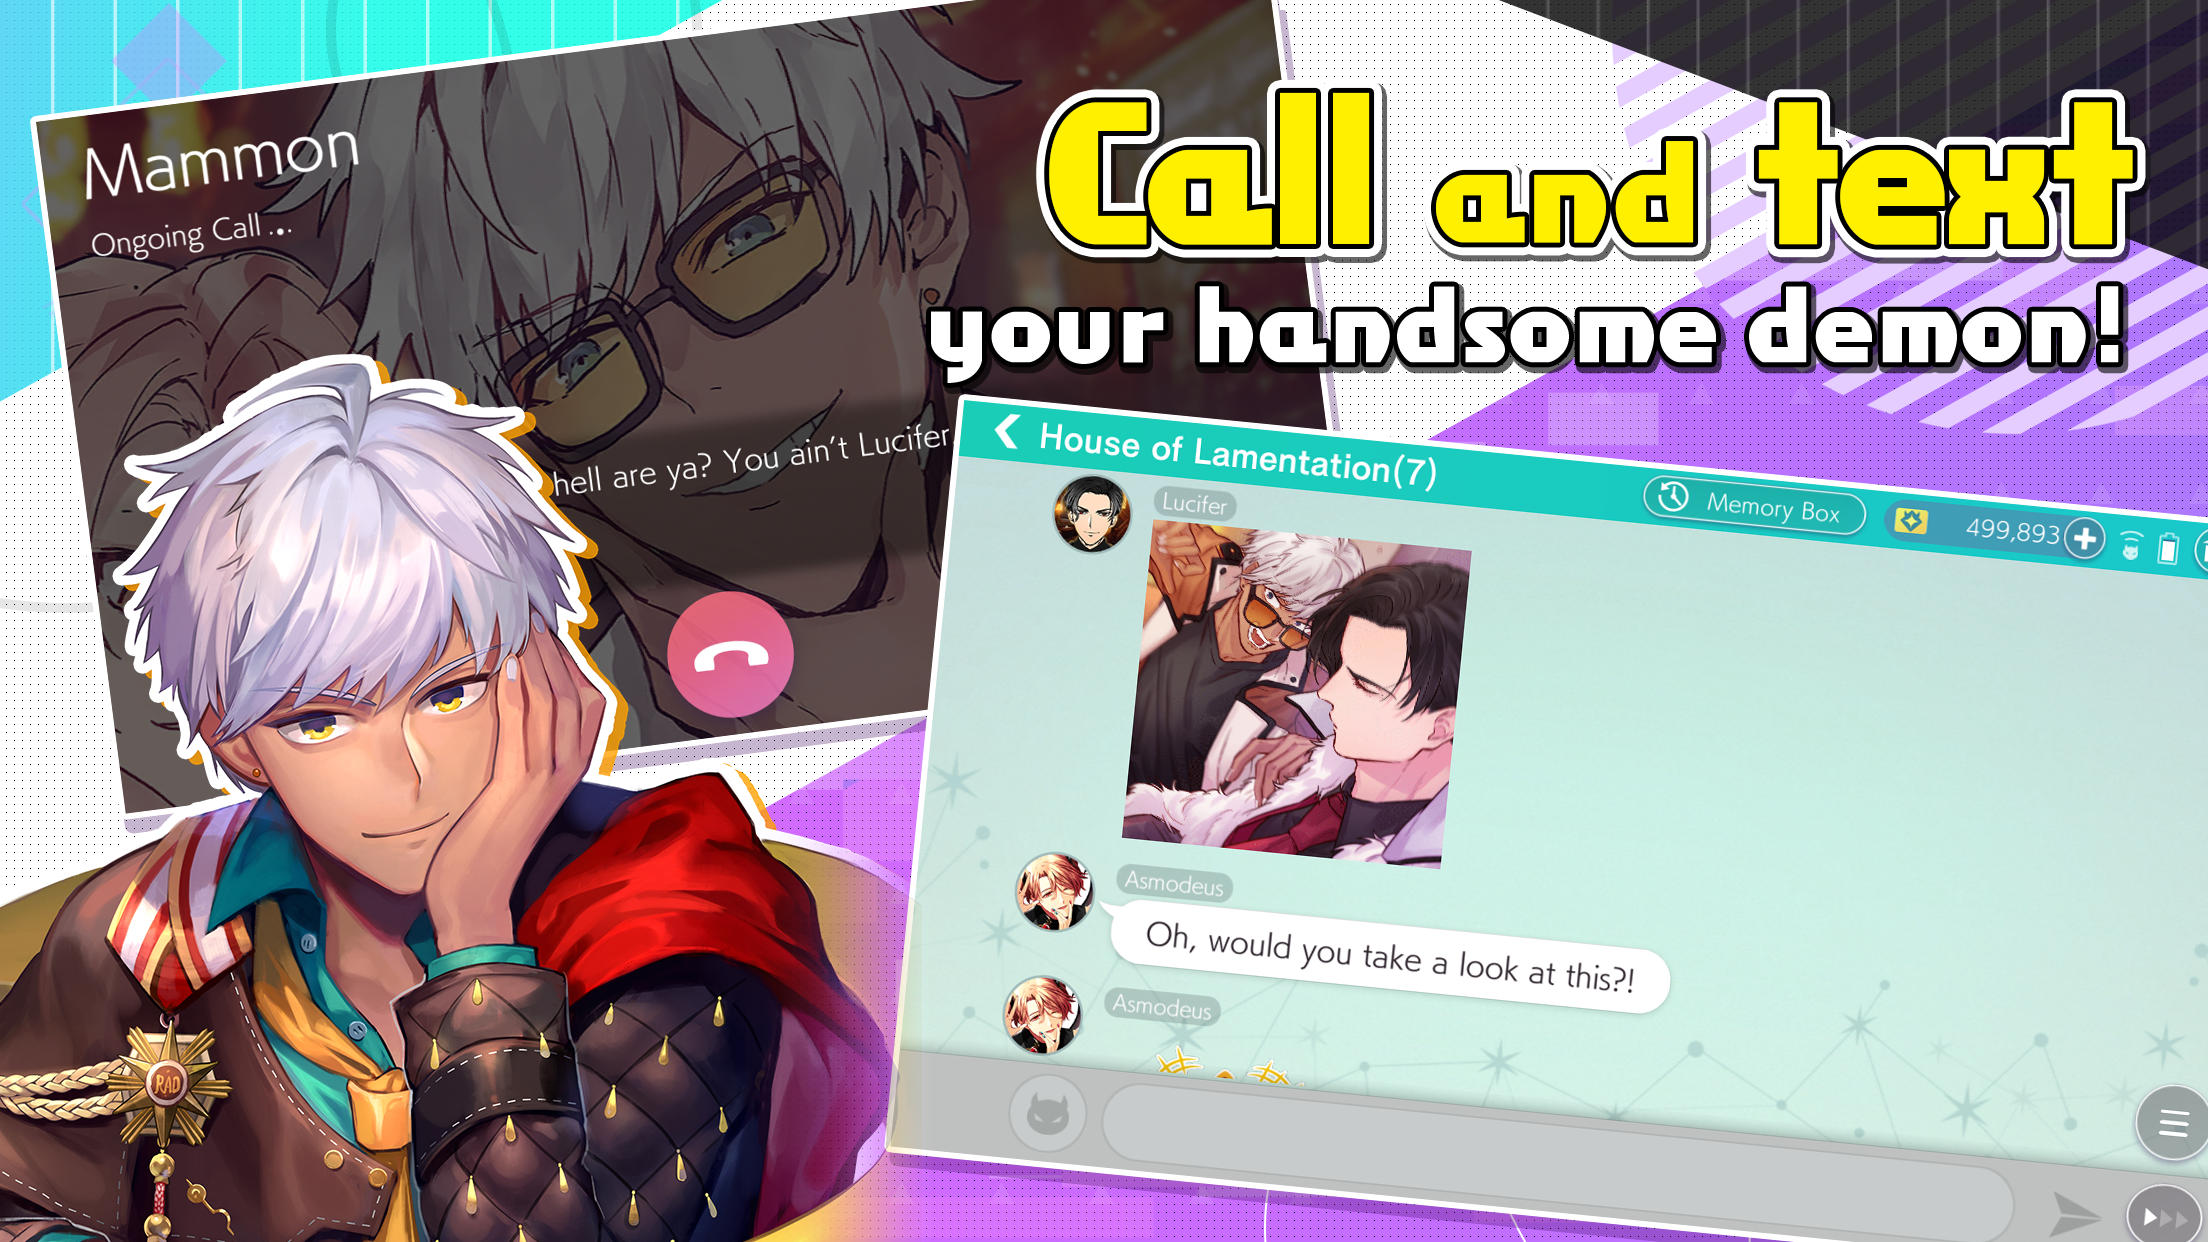 Animeidle: Watch Anime Online APK (Android App) - Free Download